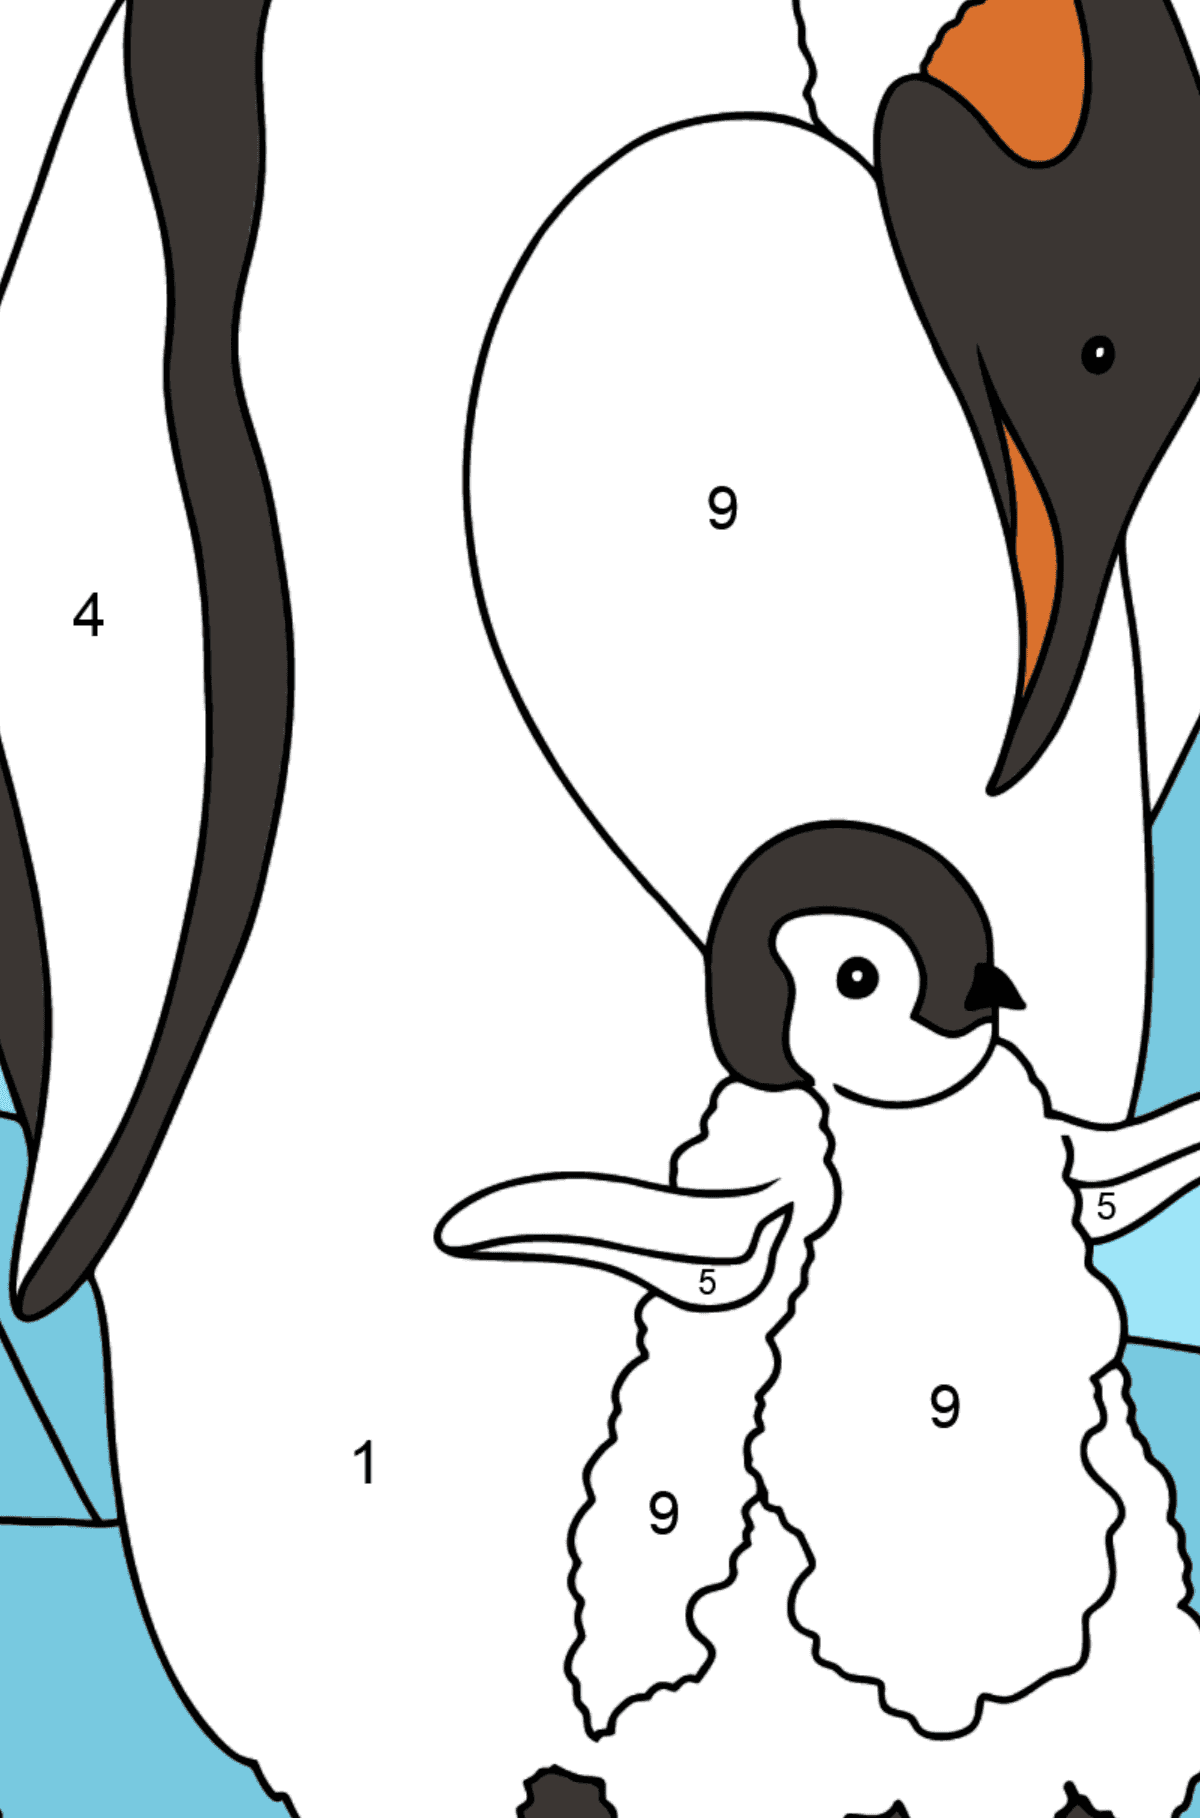 Coloring Page - A Penguin with a Baby - Coloring by Numbers for Kids